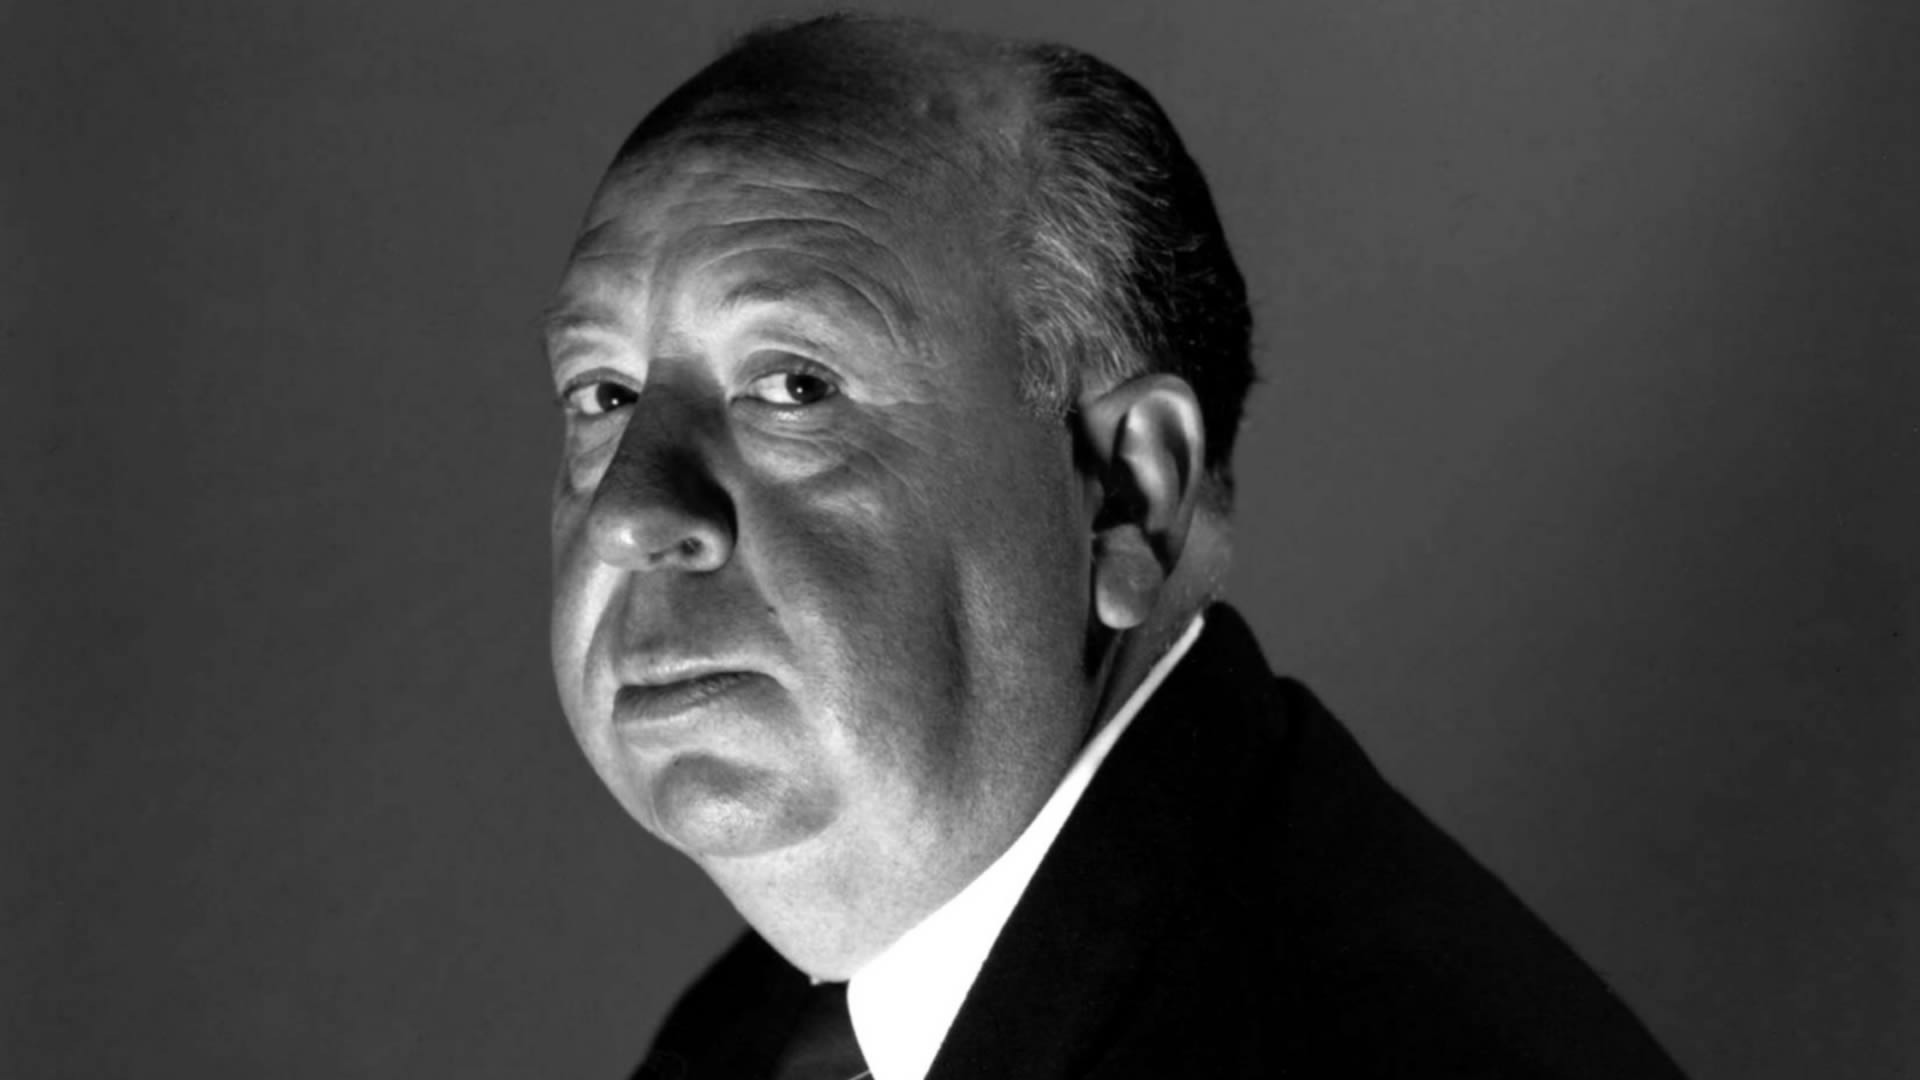 alfred hitchcock presents no pain